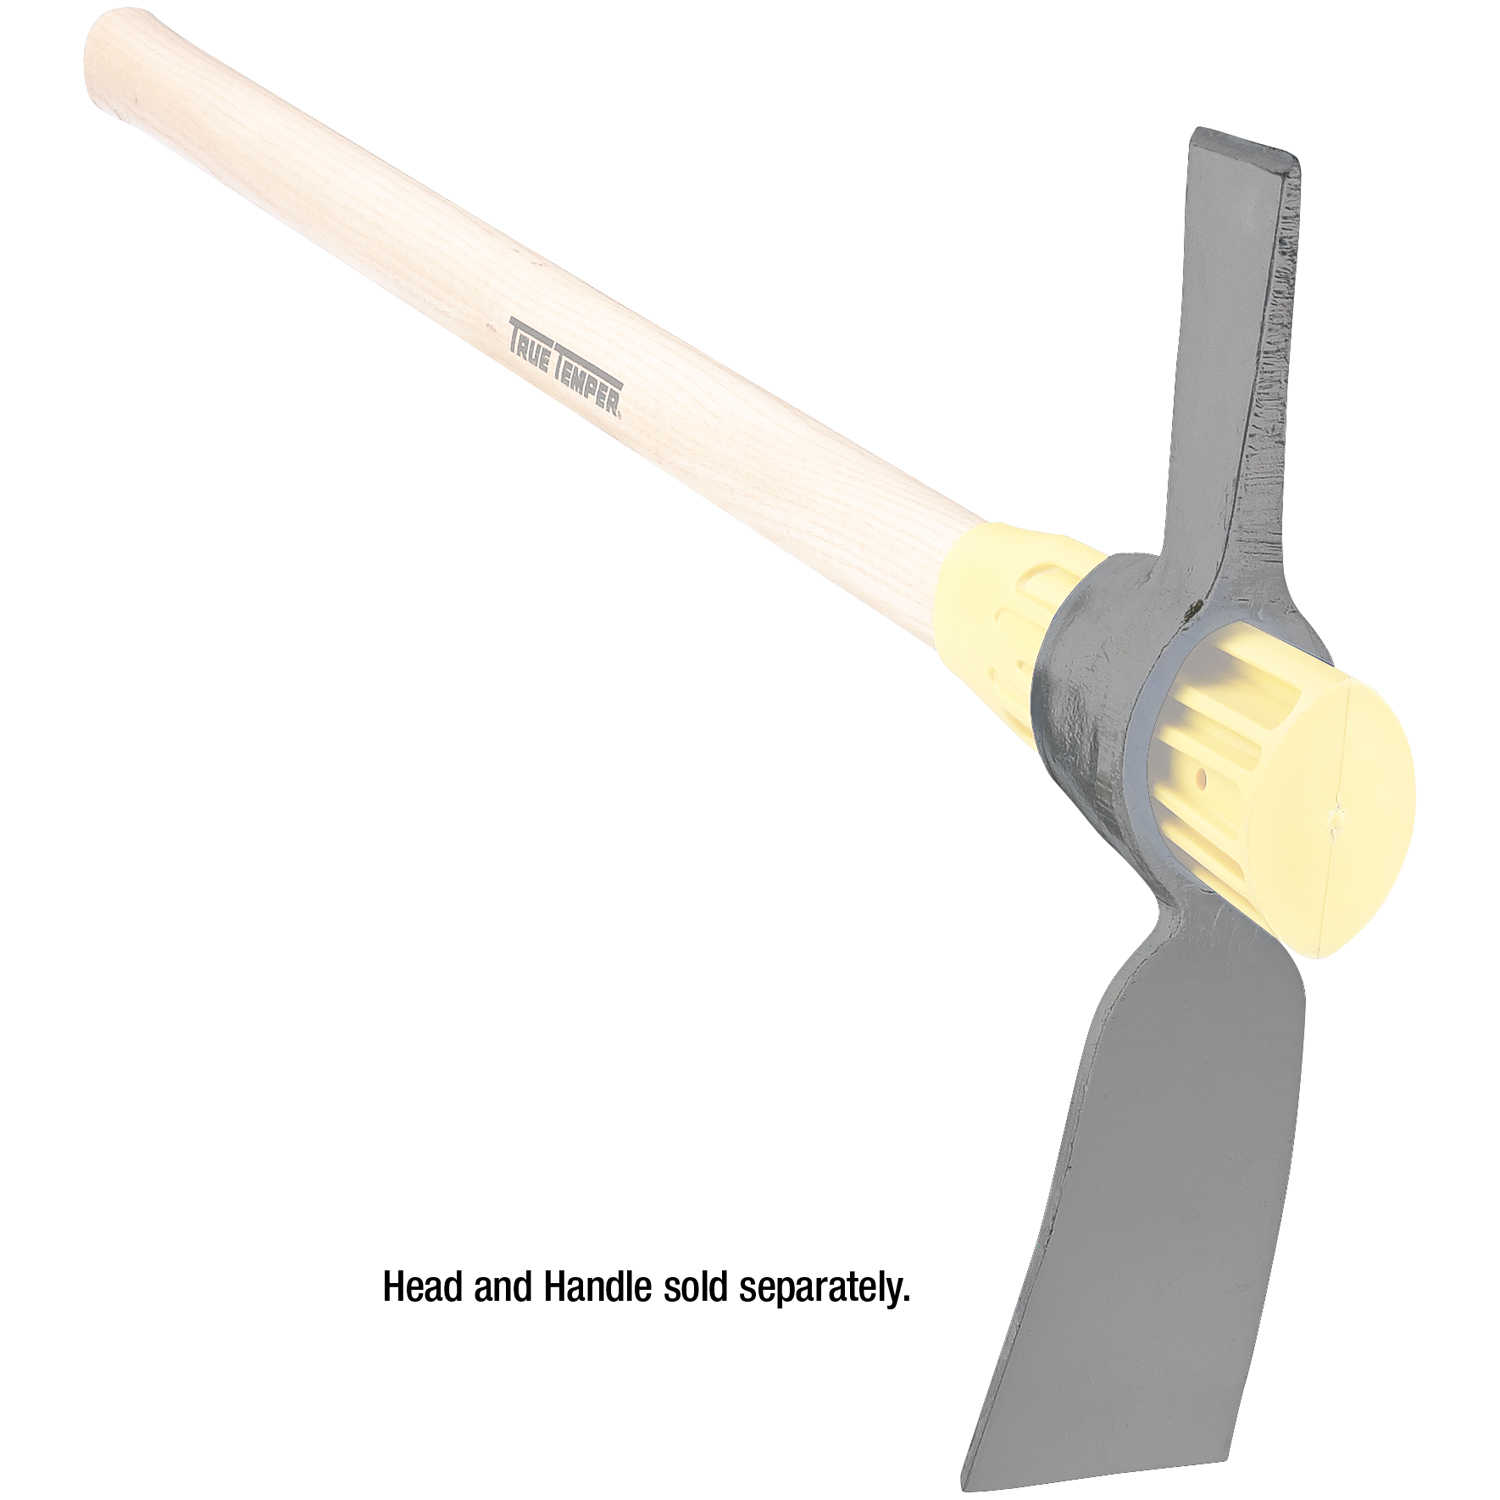 Details about   36" Wood Handle Pick Mattock 5 lb Tempered Steel Head Soil Digging Root Cutter 